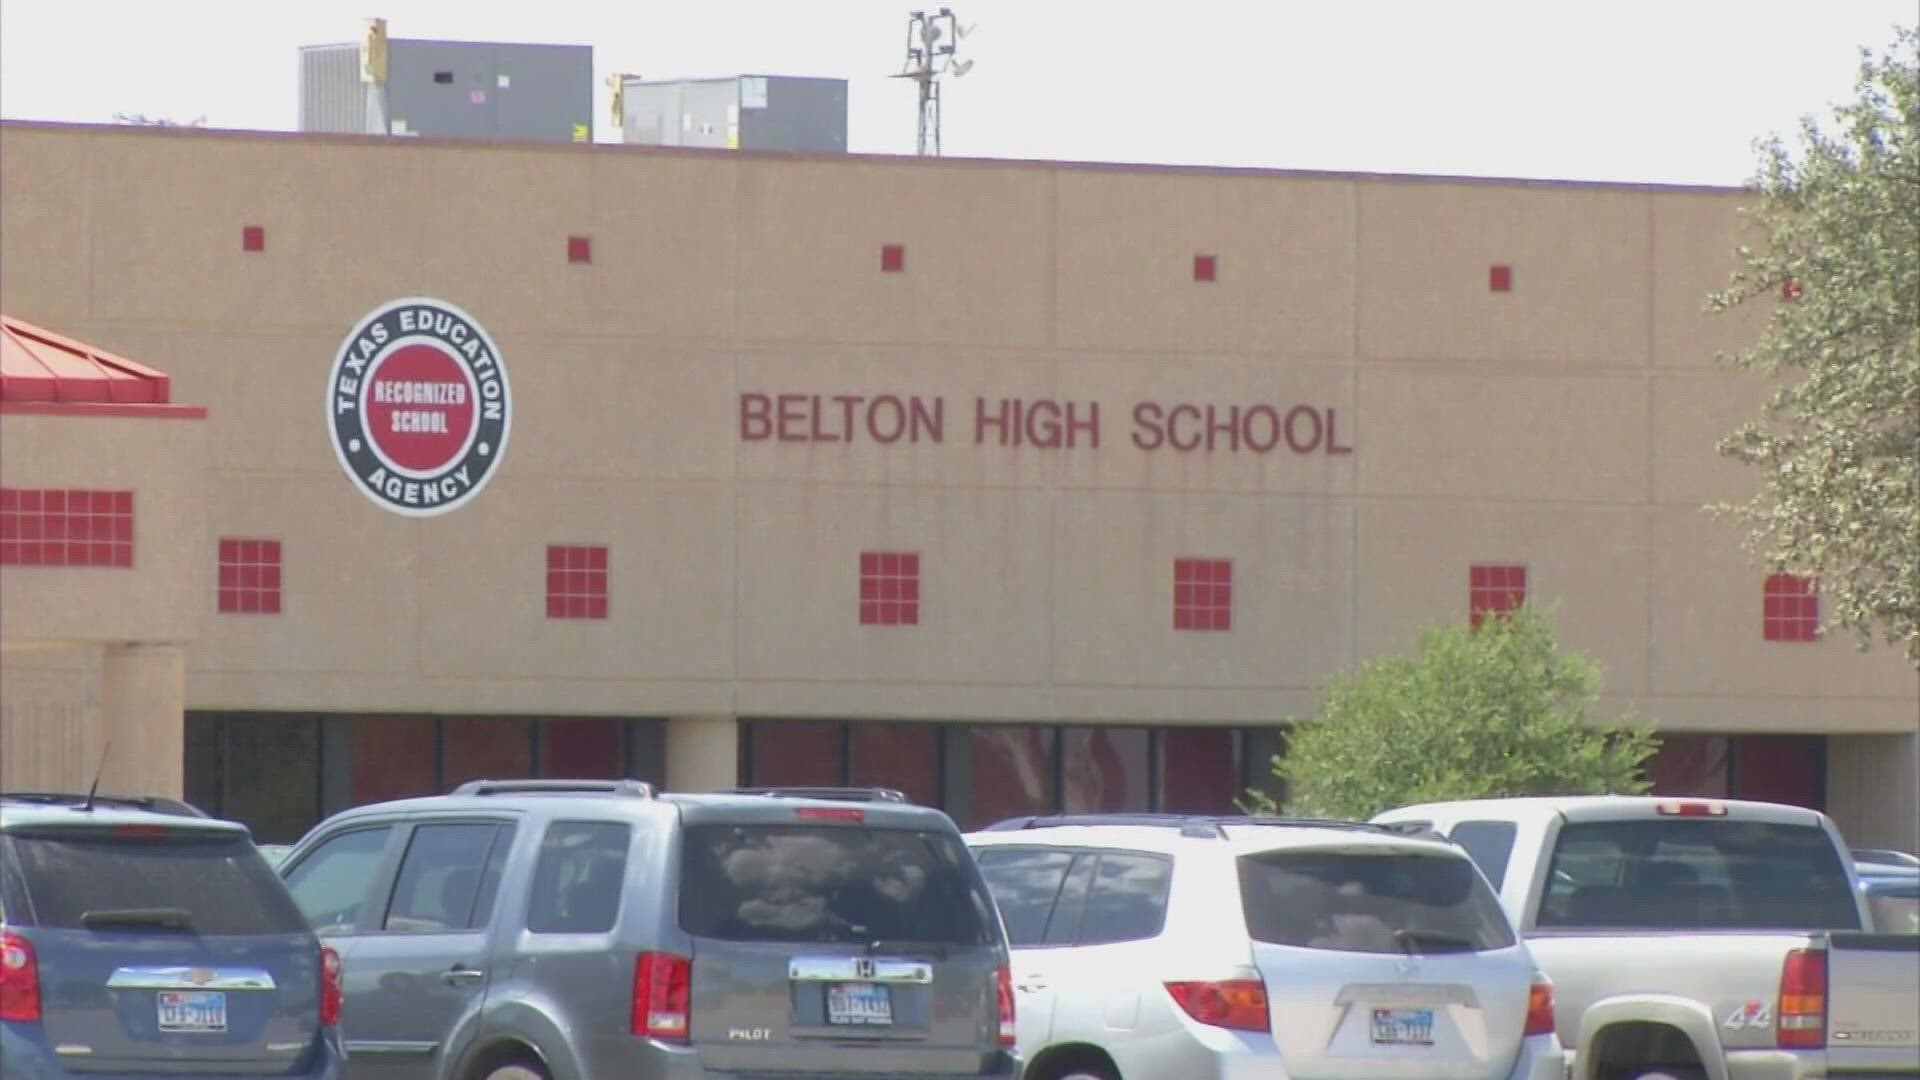 The nearly $174 million dollar bonds that just passed last month for Belton ISD is being called into question.